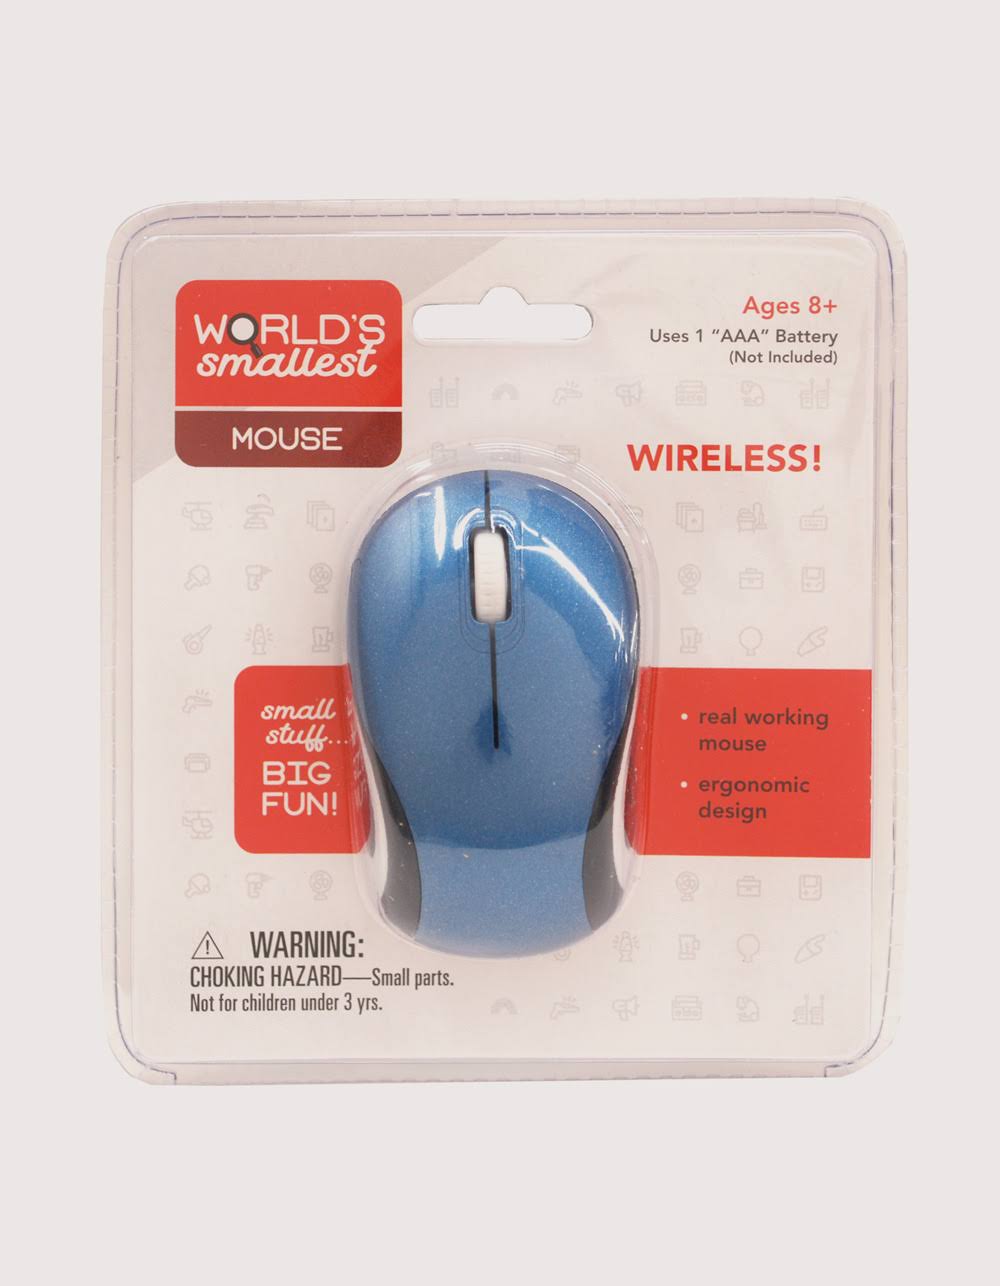 World Smallest Wireless Mouse (by Westminter)